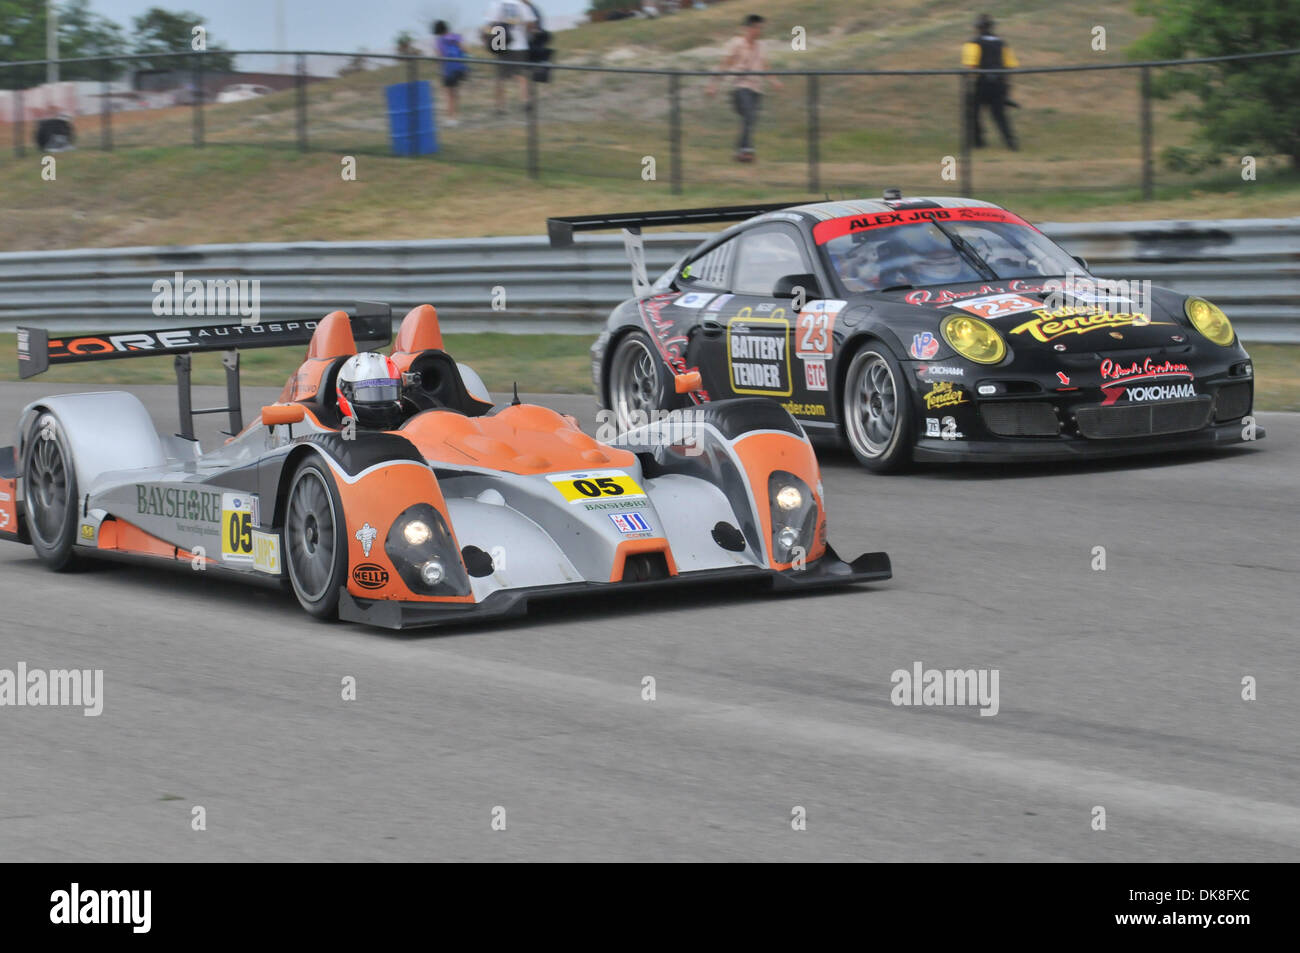 July 22, 2011 - Bowmanville, Ontario, Canada - The #05 CORE Autosport Bayshore Recycling/ Composite Resources Oreca FLM09 passes the #23 Alex Job Racing Battery Tender/ Robert Graham/ William Rast Porsche 911 GT3 Cup during practice for the ALMS race at Mosport. The Mobil 1 Grand Prix of Mosport is held at the Mosport International Raceway in Bowmanville Ontario. (Credit Image: © K Stock Photo